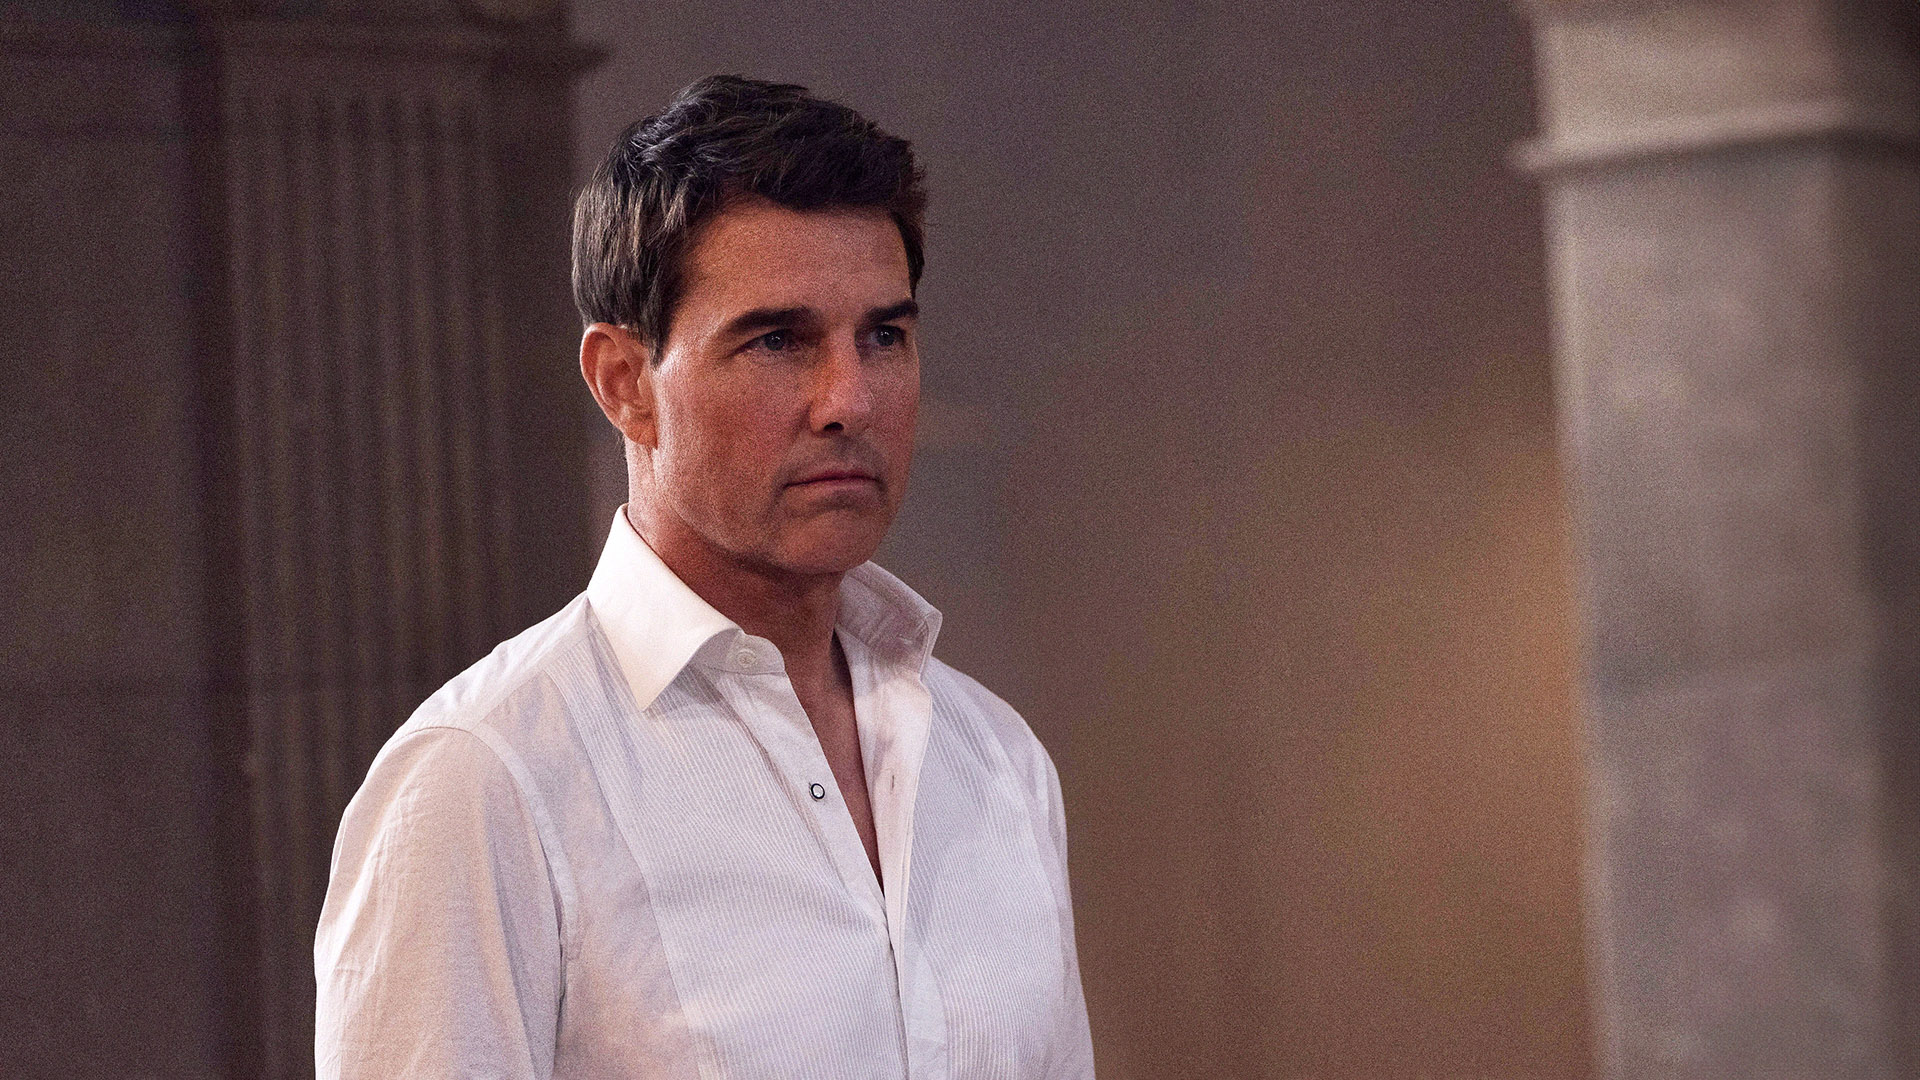 Can We Talk About How Tom Cruise's Staying Power Lies in His Underwear?